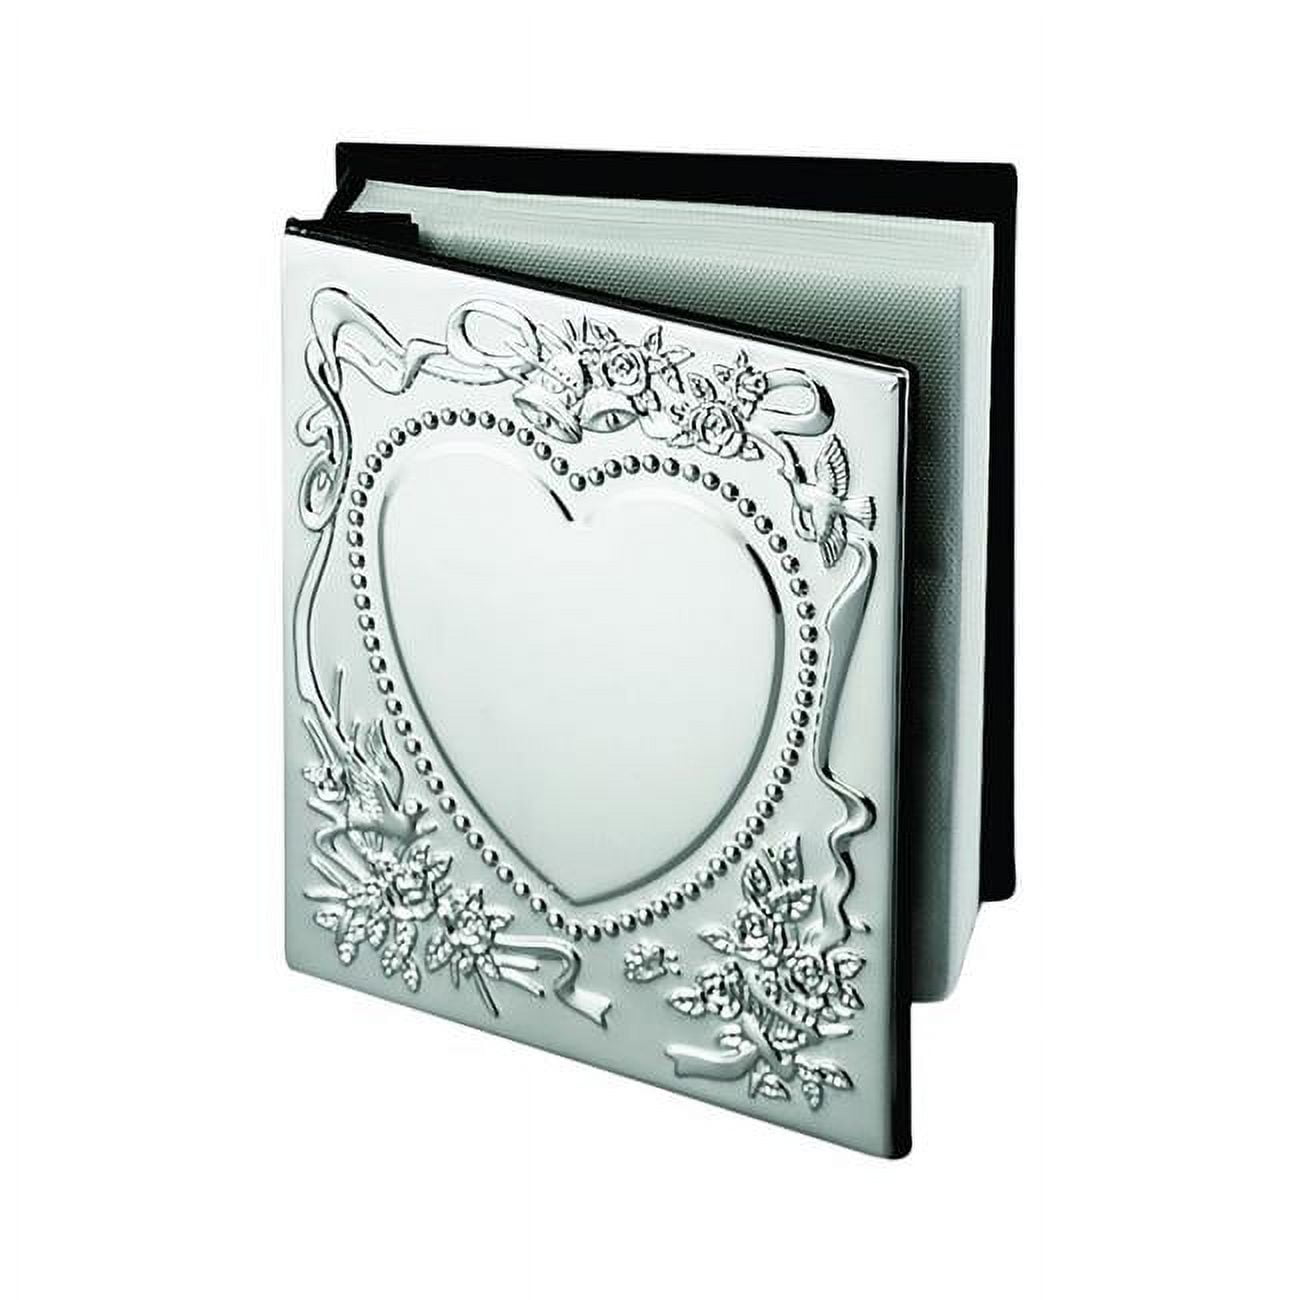 Picture of Creative Gifts International 024404 4 x 6 in. Nickel Plated Holds with 100 - Sweetheart Album